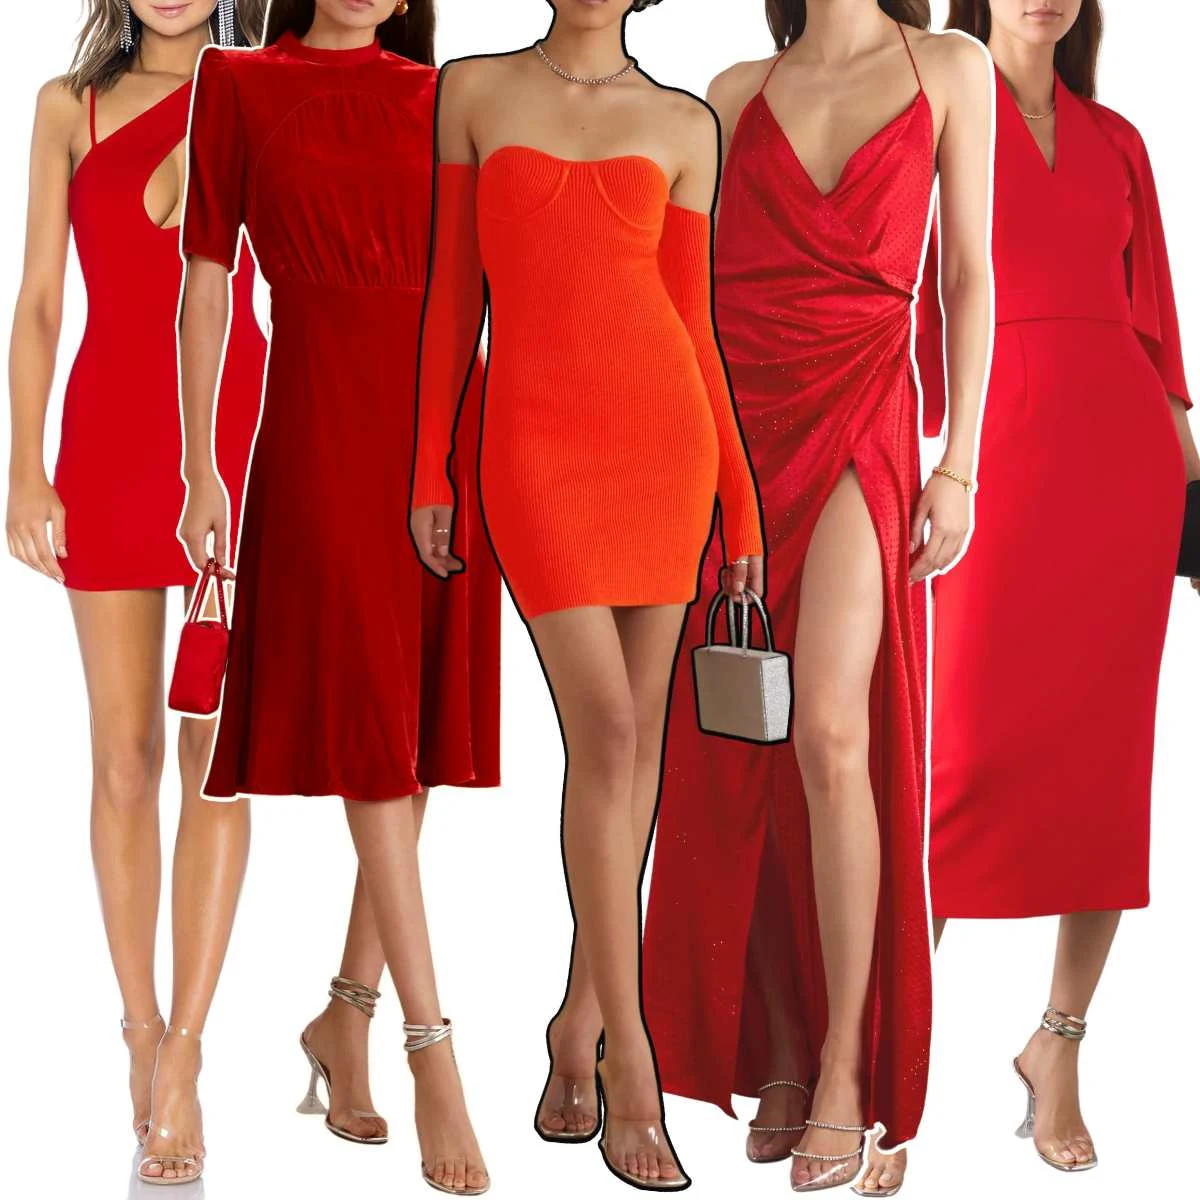 4 Color Shoes to Wear With a Red Dress